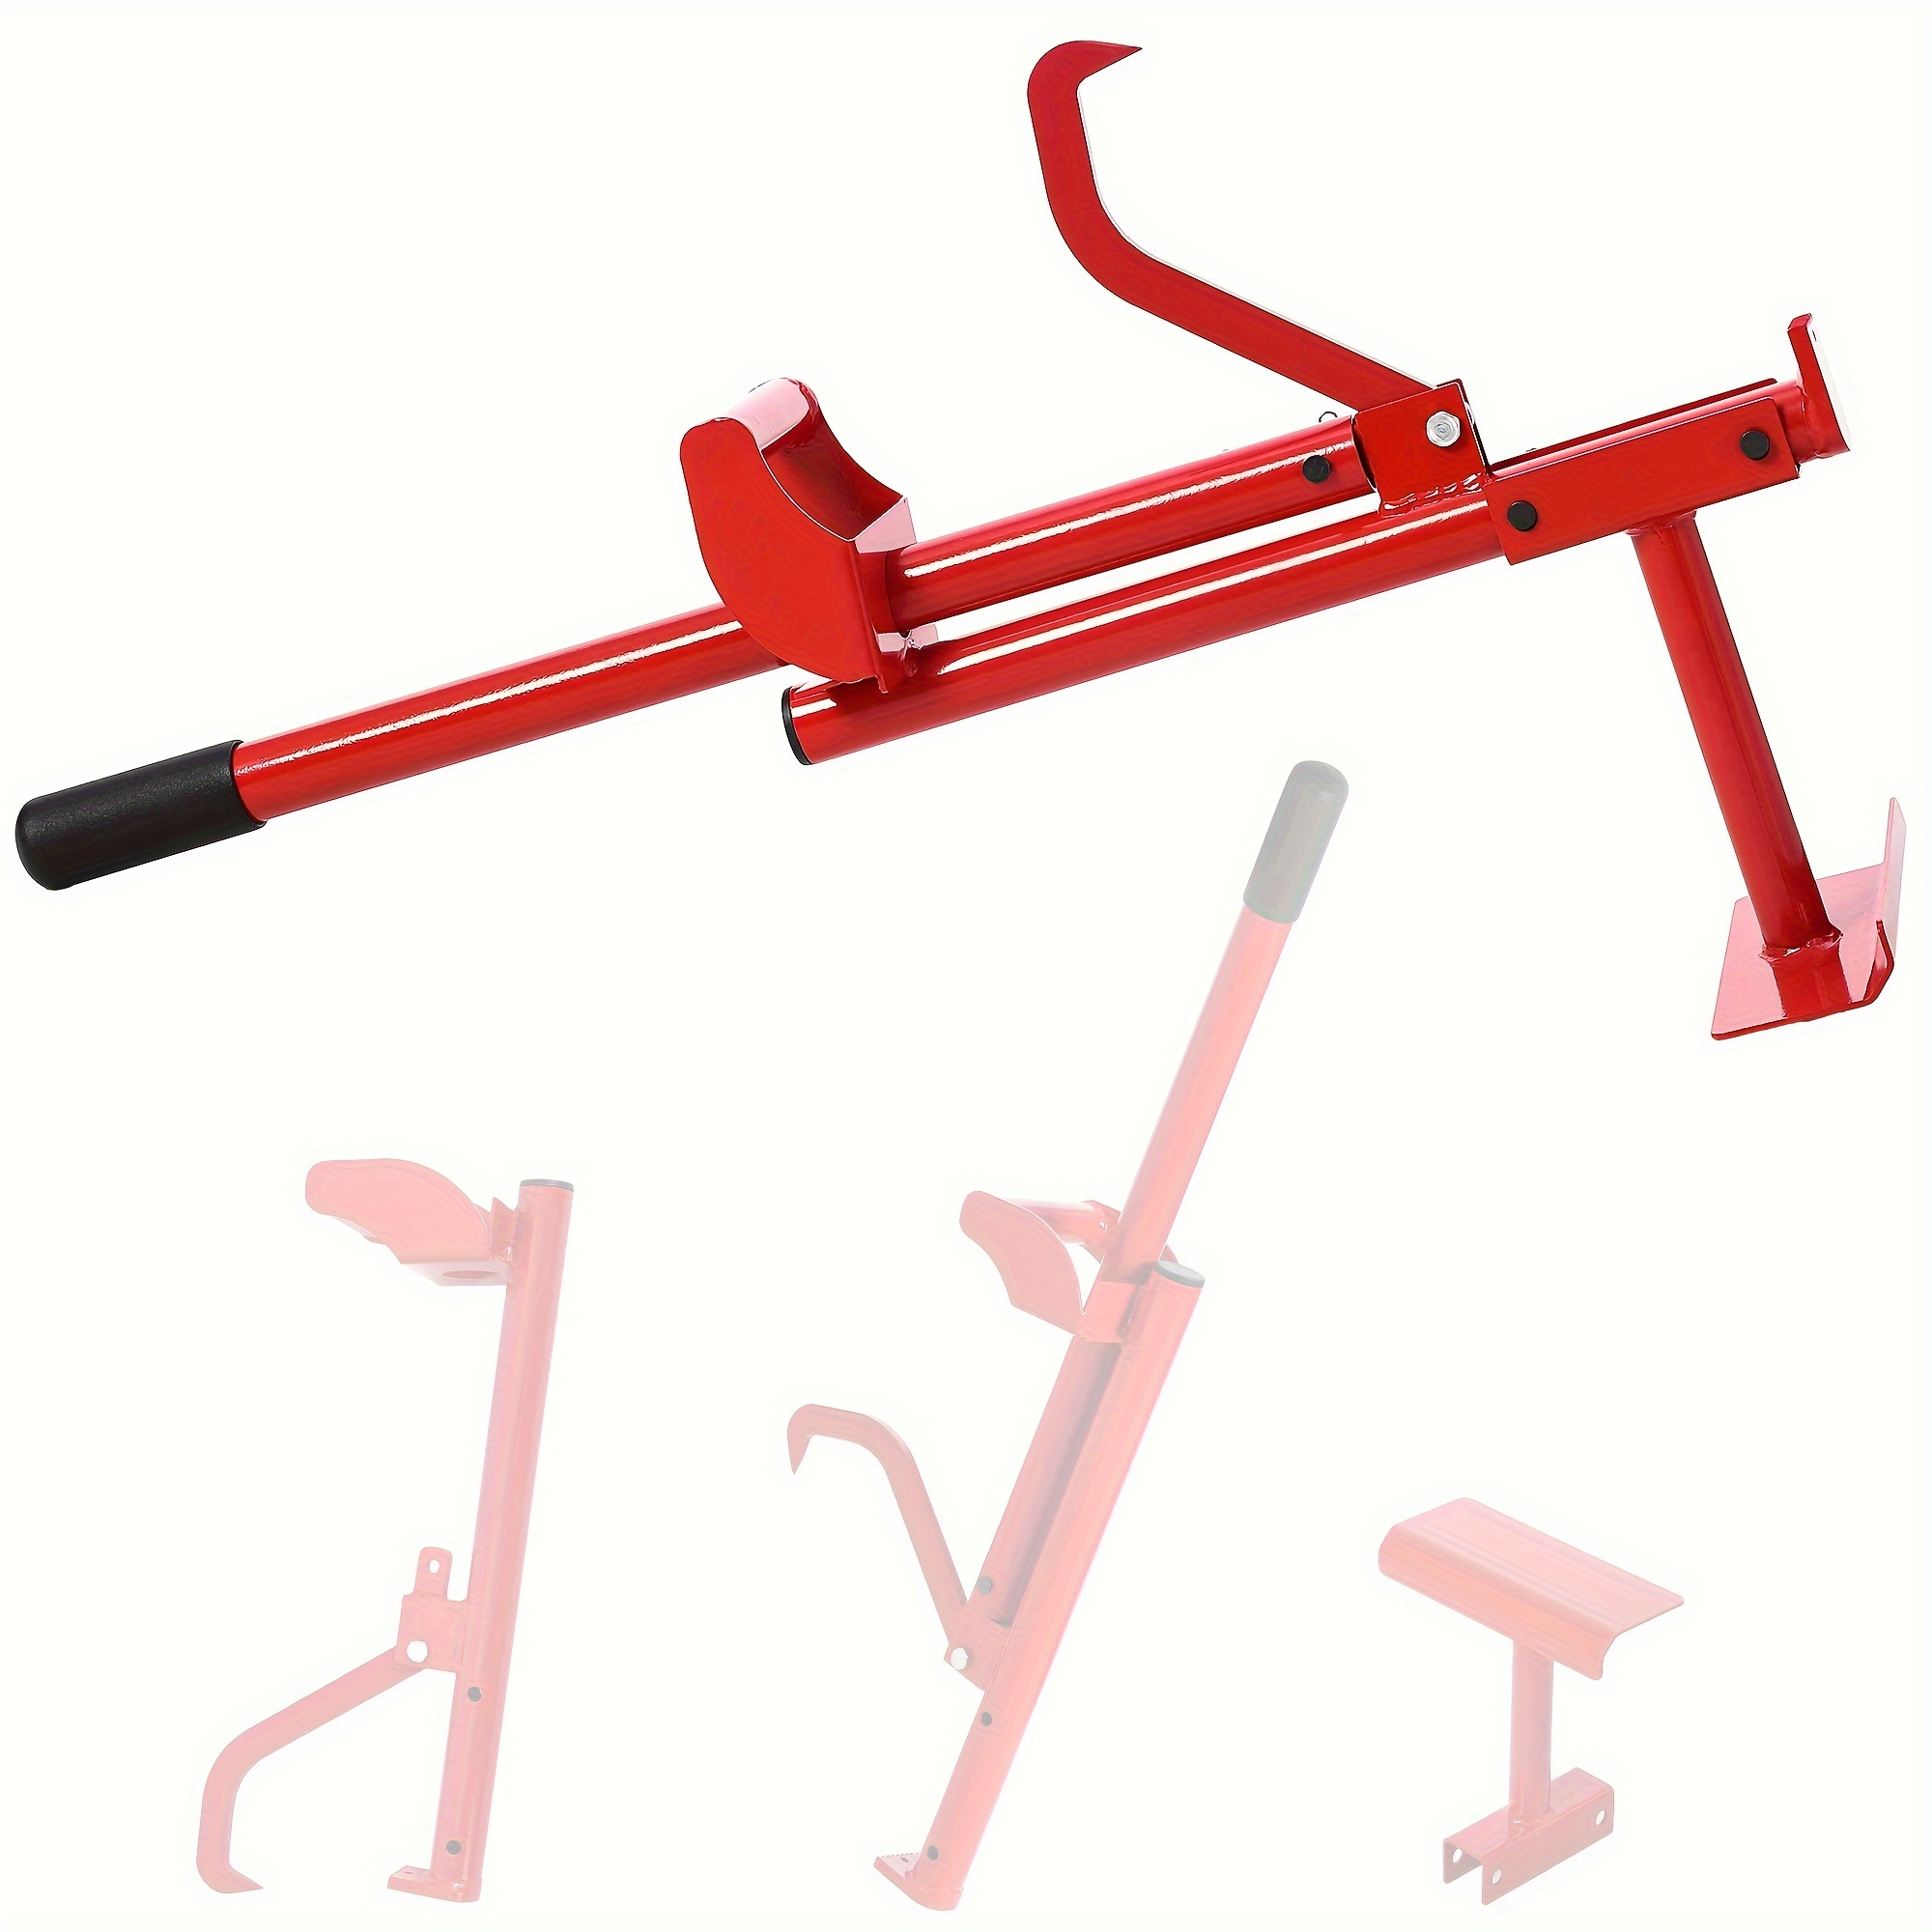 

3 In 1 Logging Tools, Log Hauler, Cant Hook, And Timberjack, Logging Tools And Equipment, Log Lifter, Log Tongs, Forestry Multitool, Firewood Harvesting Hand Tools, Red